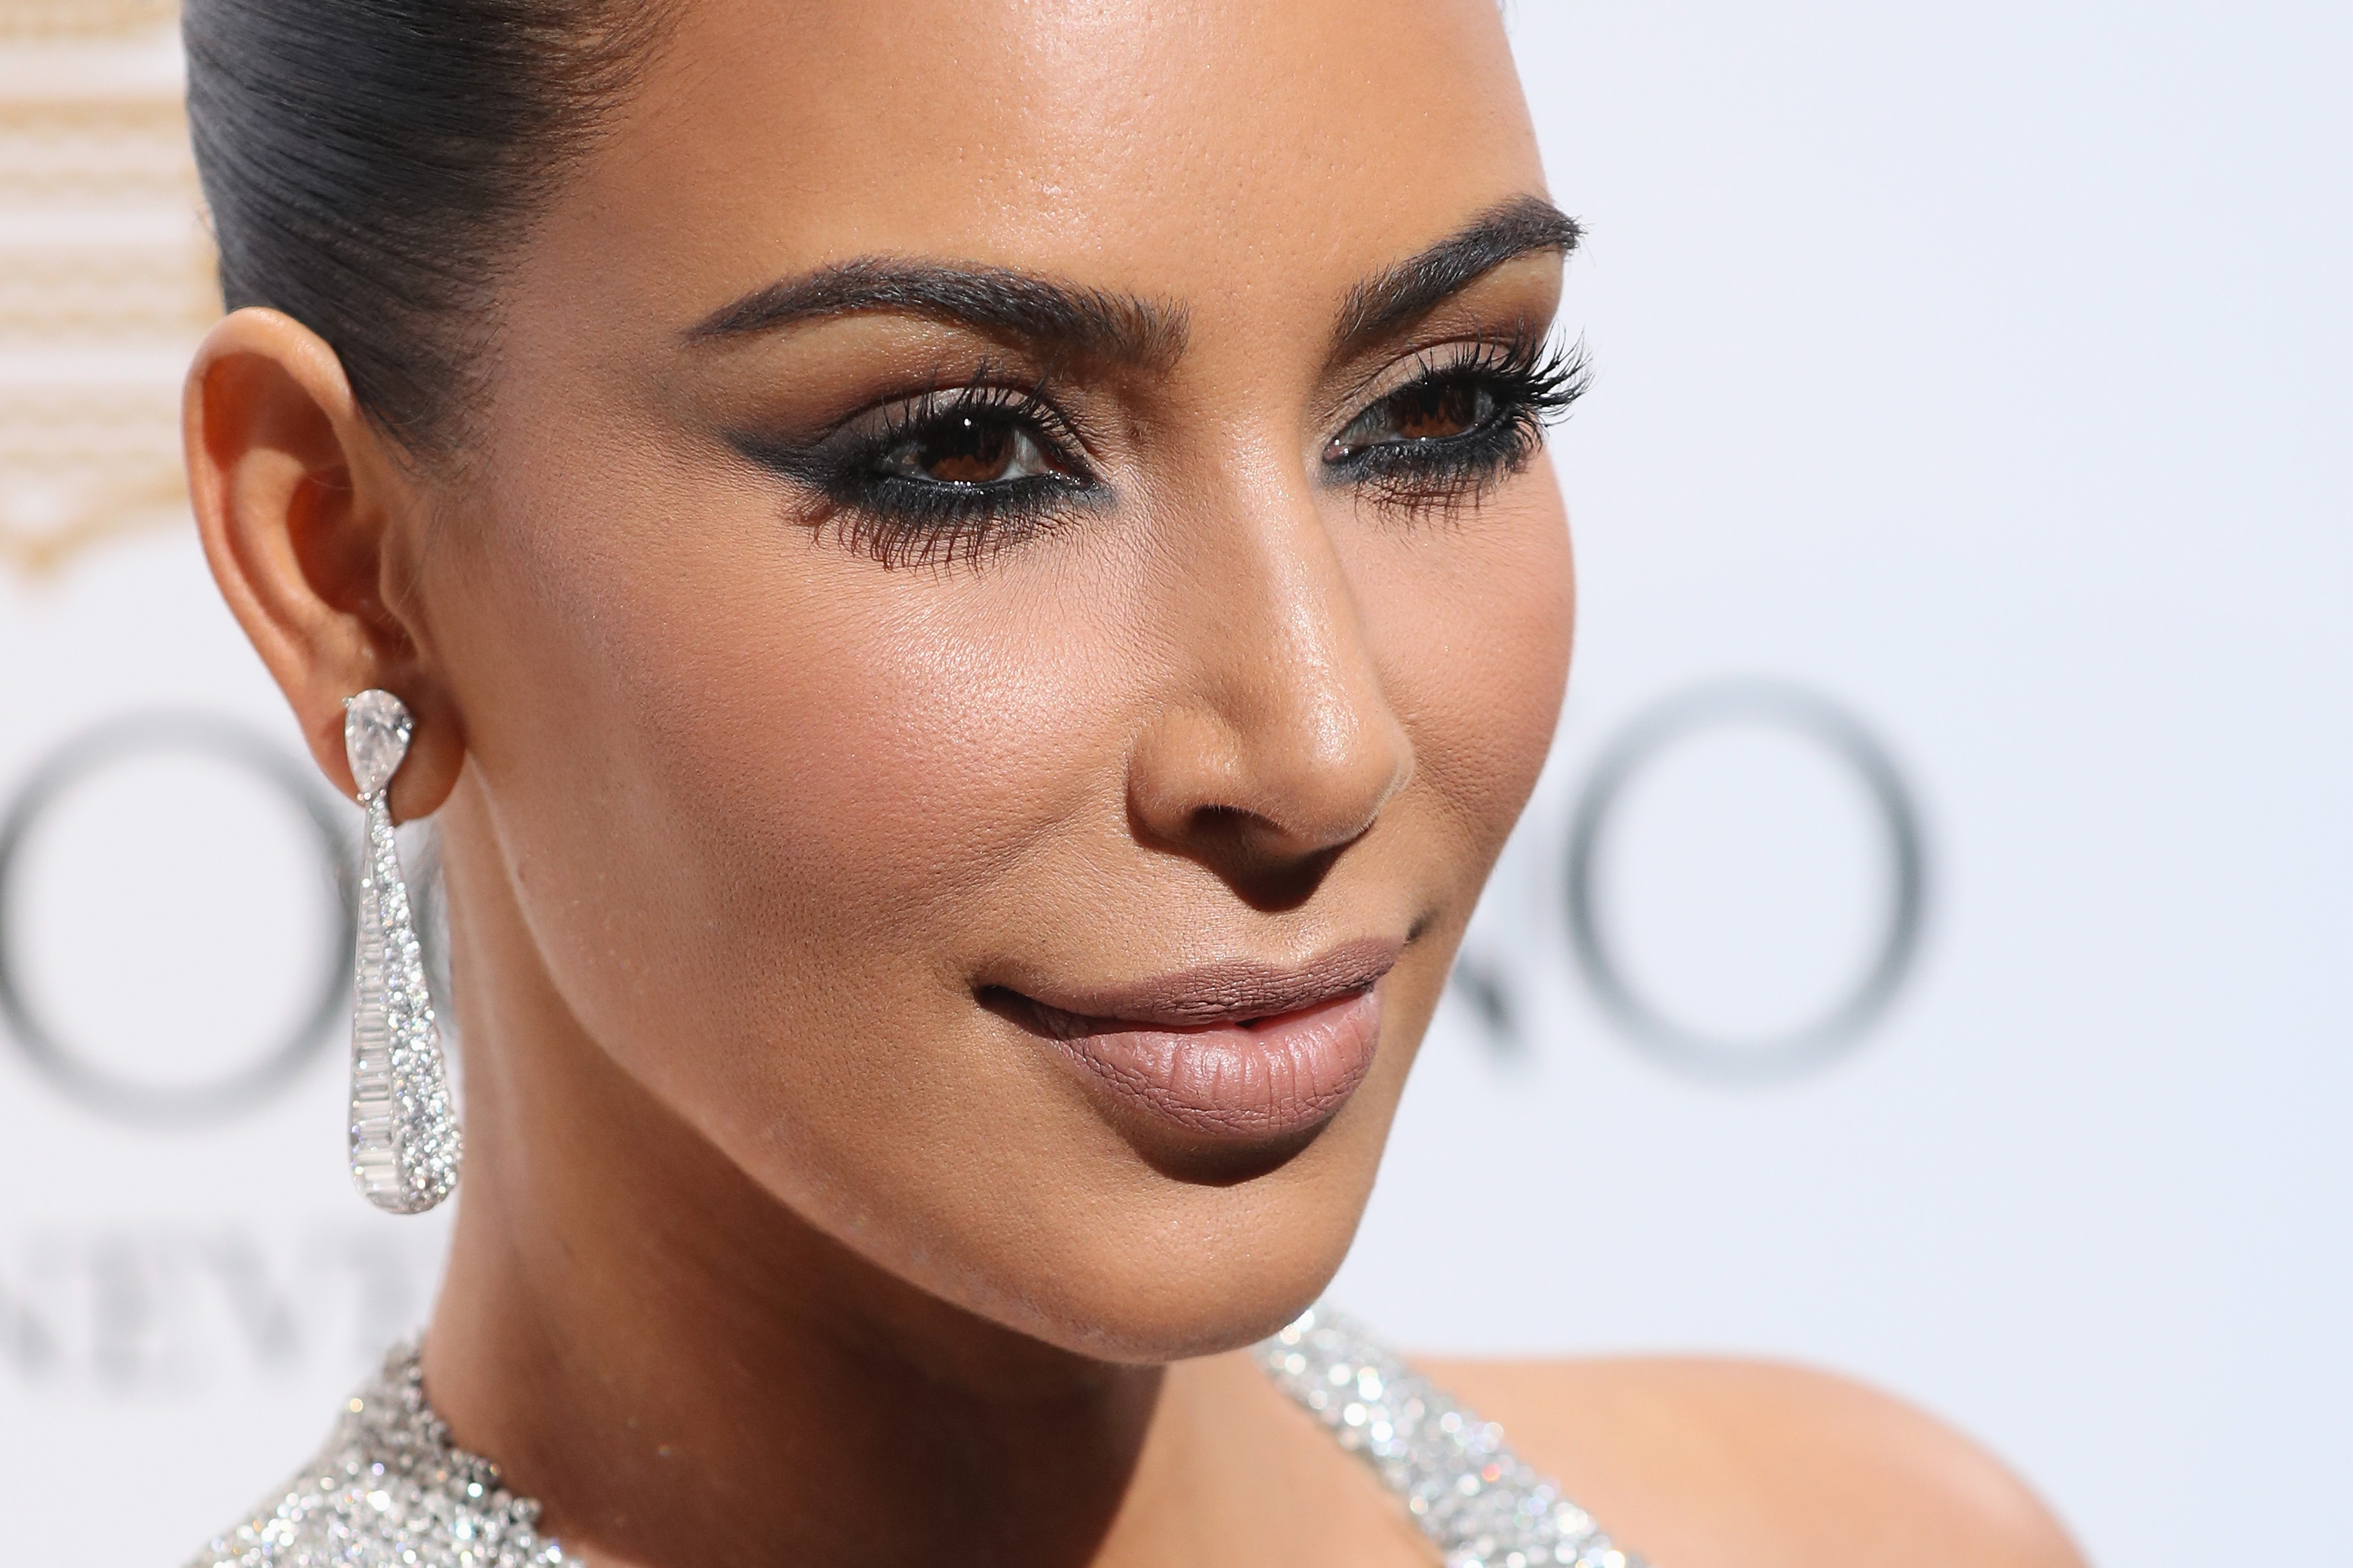 Kim Kardashian's Comments About Contouring Signal The End Of An Era